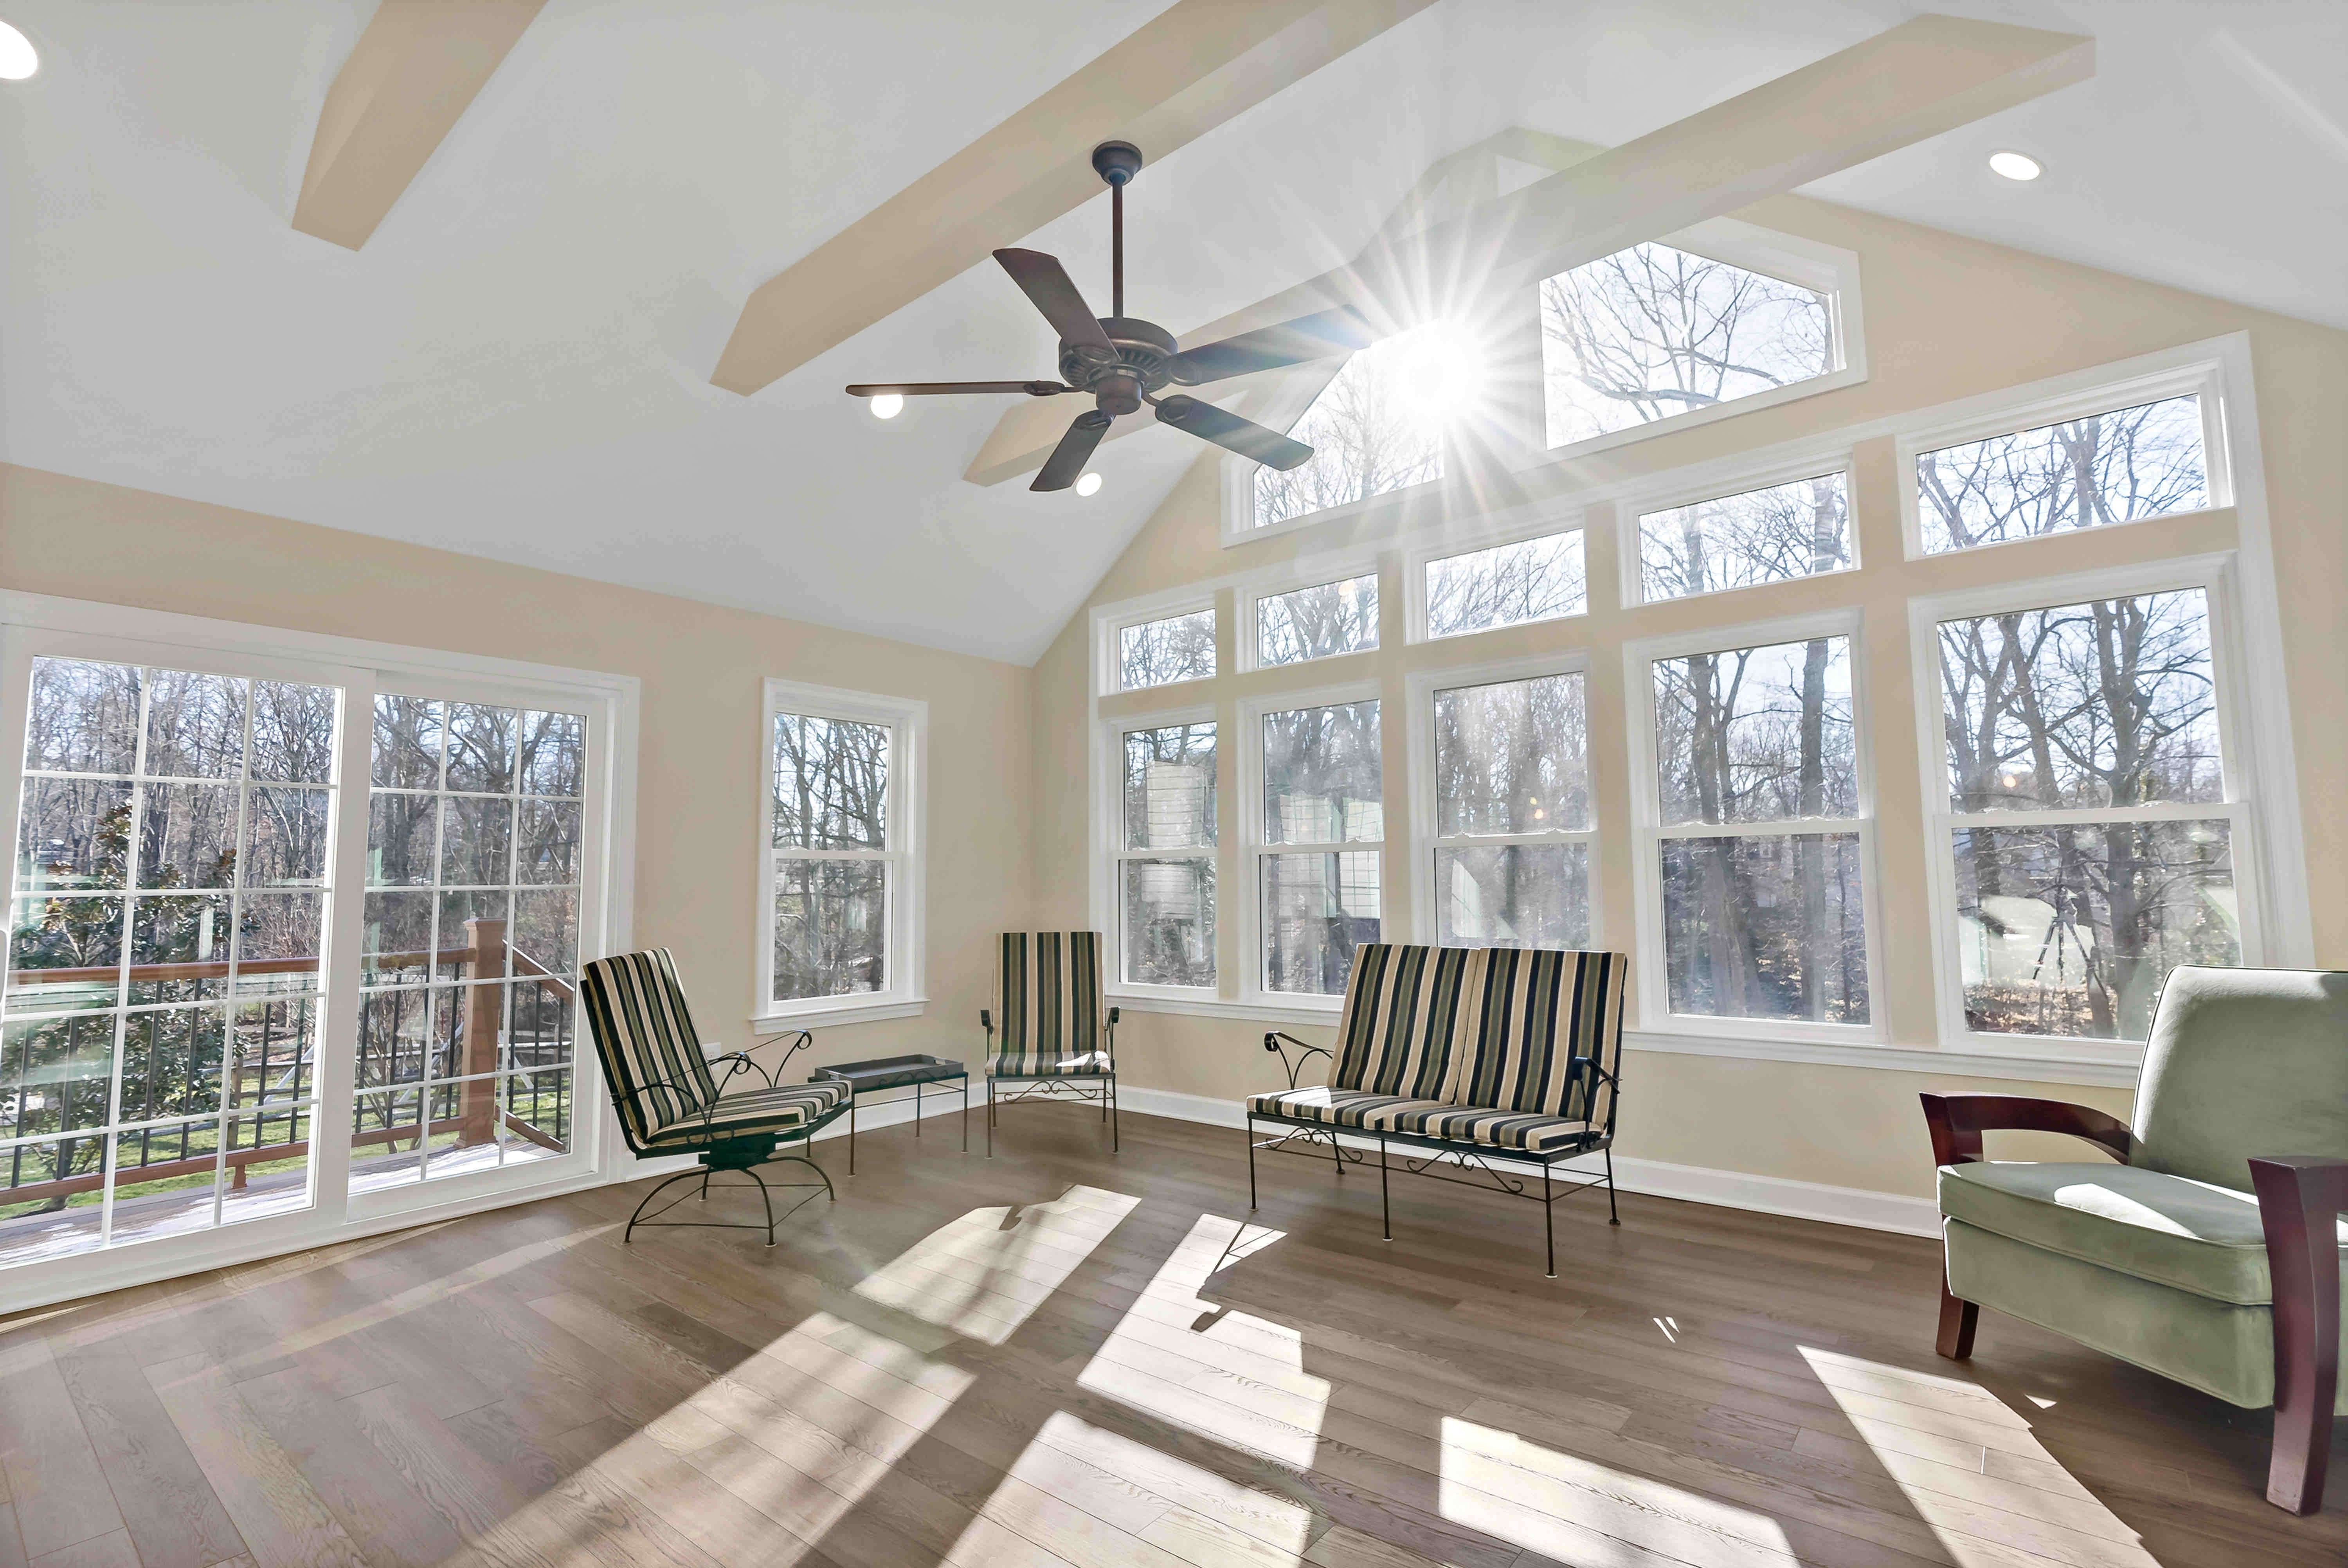 Interior of sunroom room with cathedral ceiling and ceiling fan